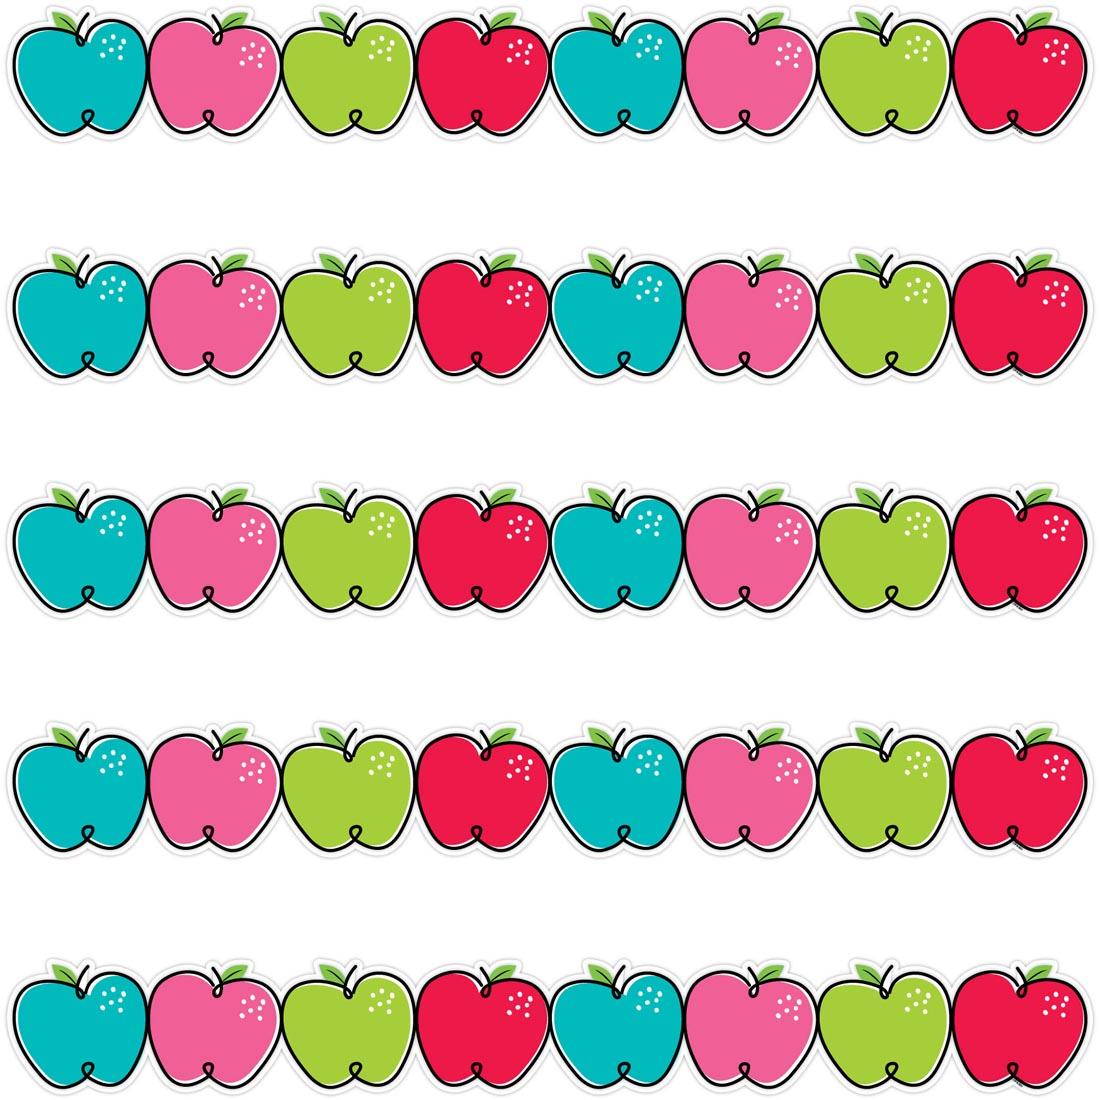 Doodle Apples EZ Border from the Core Decor collection by Creative Teaching Press